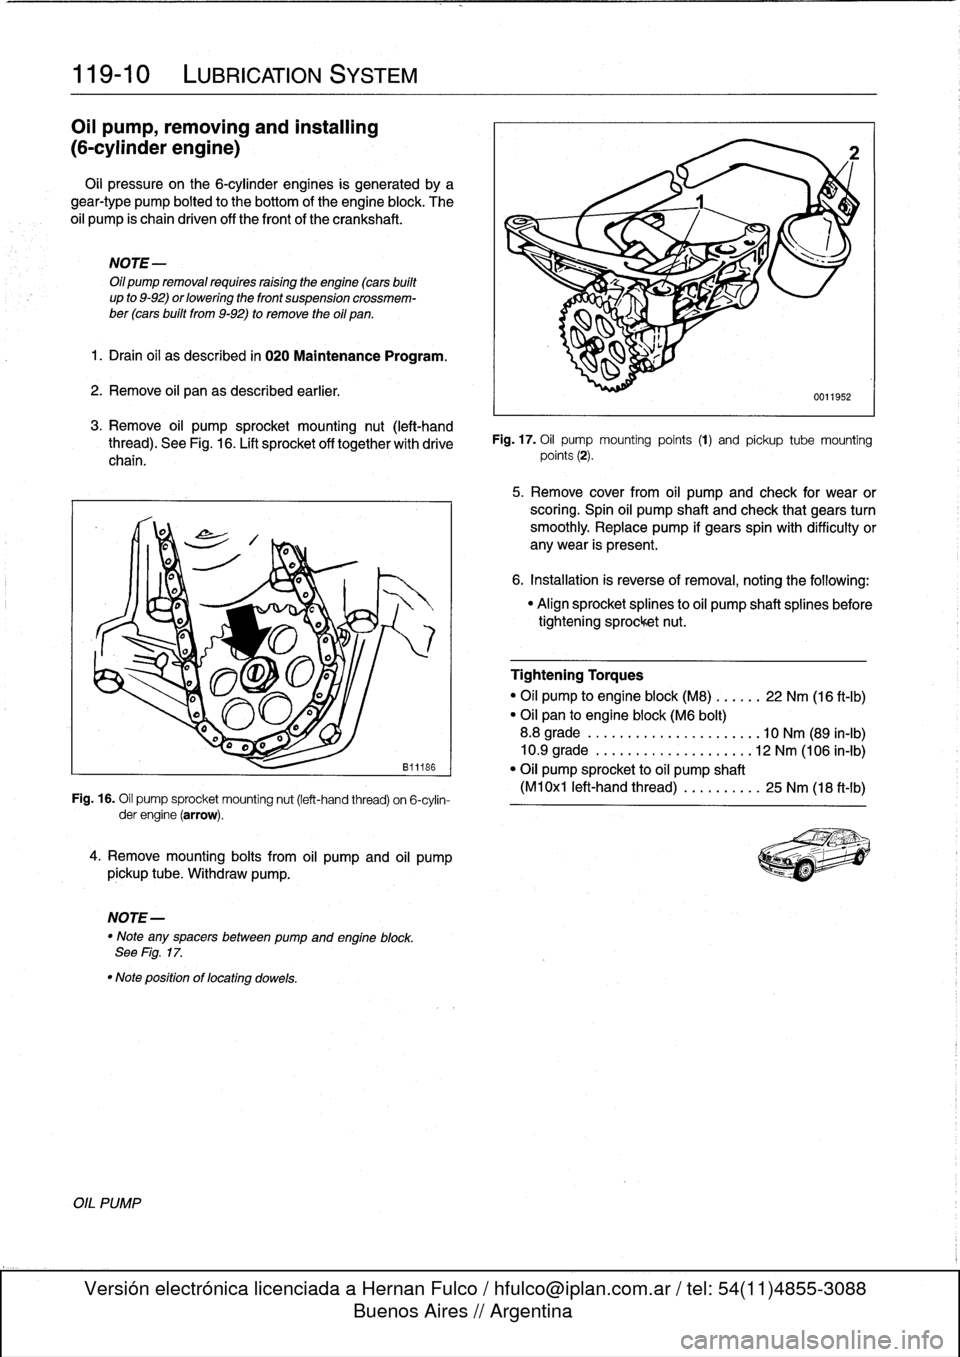 BMW 328i 1998 E36 Workshop Manual 
119-
1
0

	

LUBRICATION
SYSTEM

Oil
pump,
removing
and
installing

(6-cylinder
engine)

Oil
pressure
on
the
6-cylinder
engines
is
generated
by
a
gear-type
pump
bolted
to
the
bottom
of
the
engine
blo